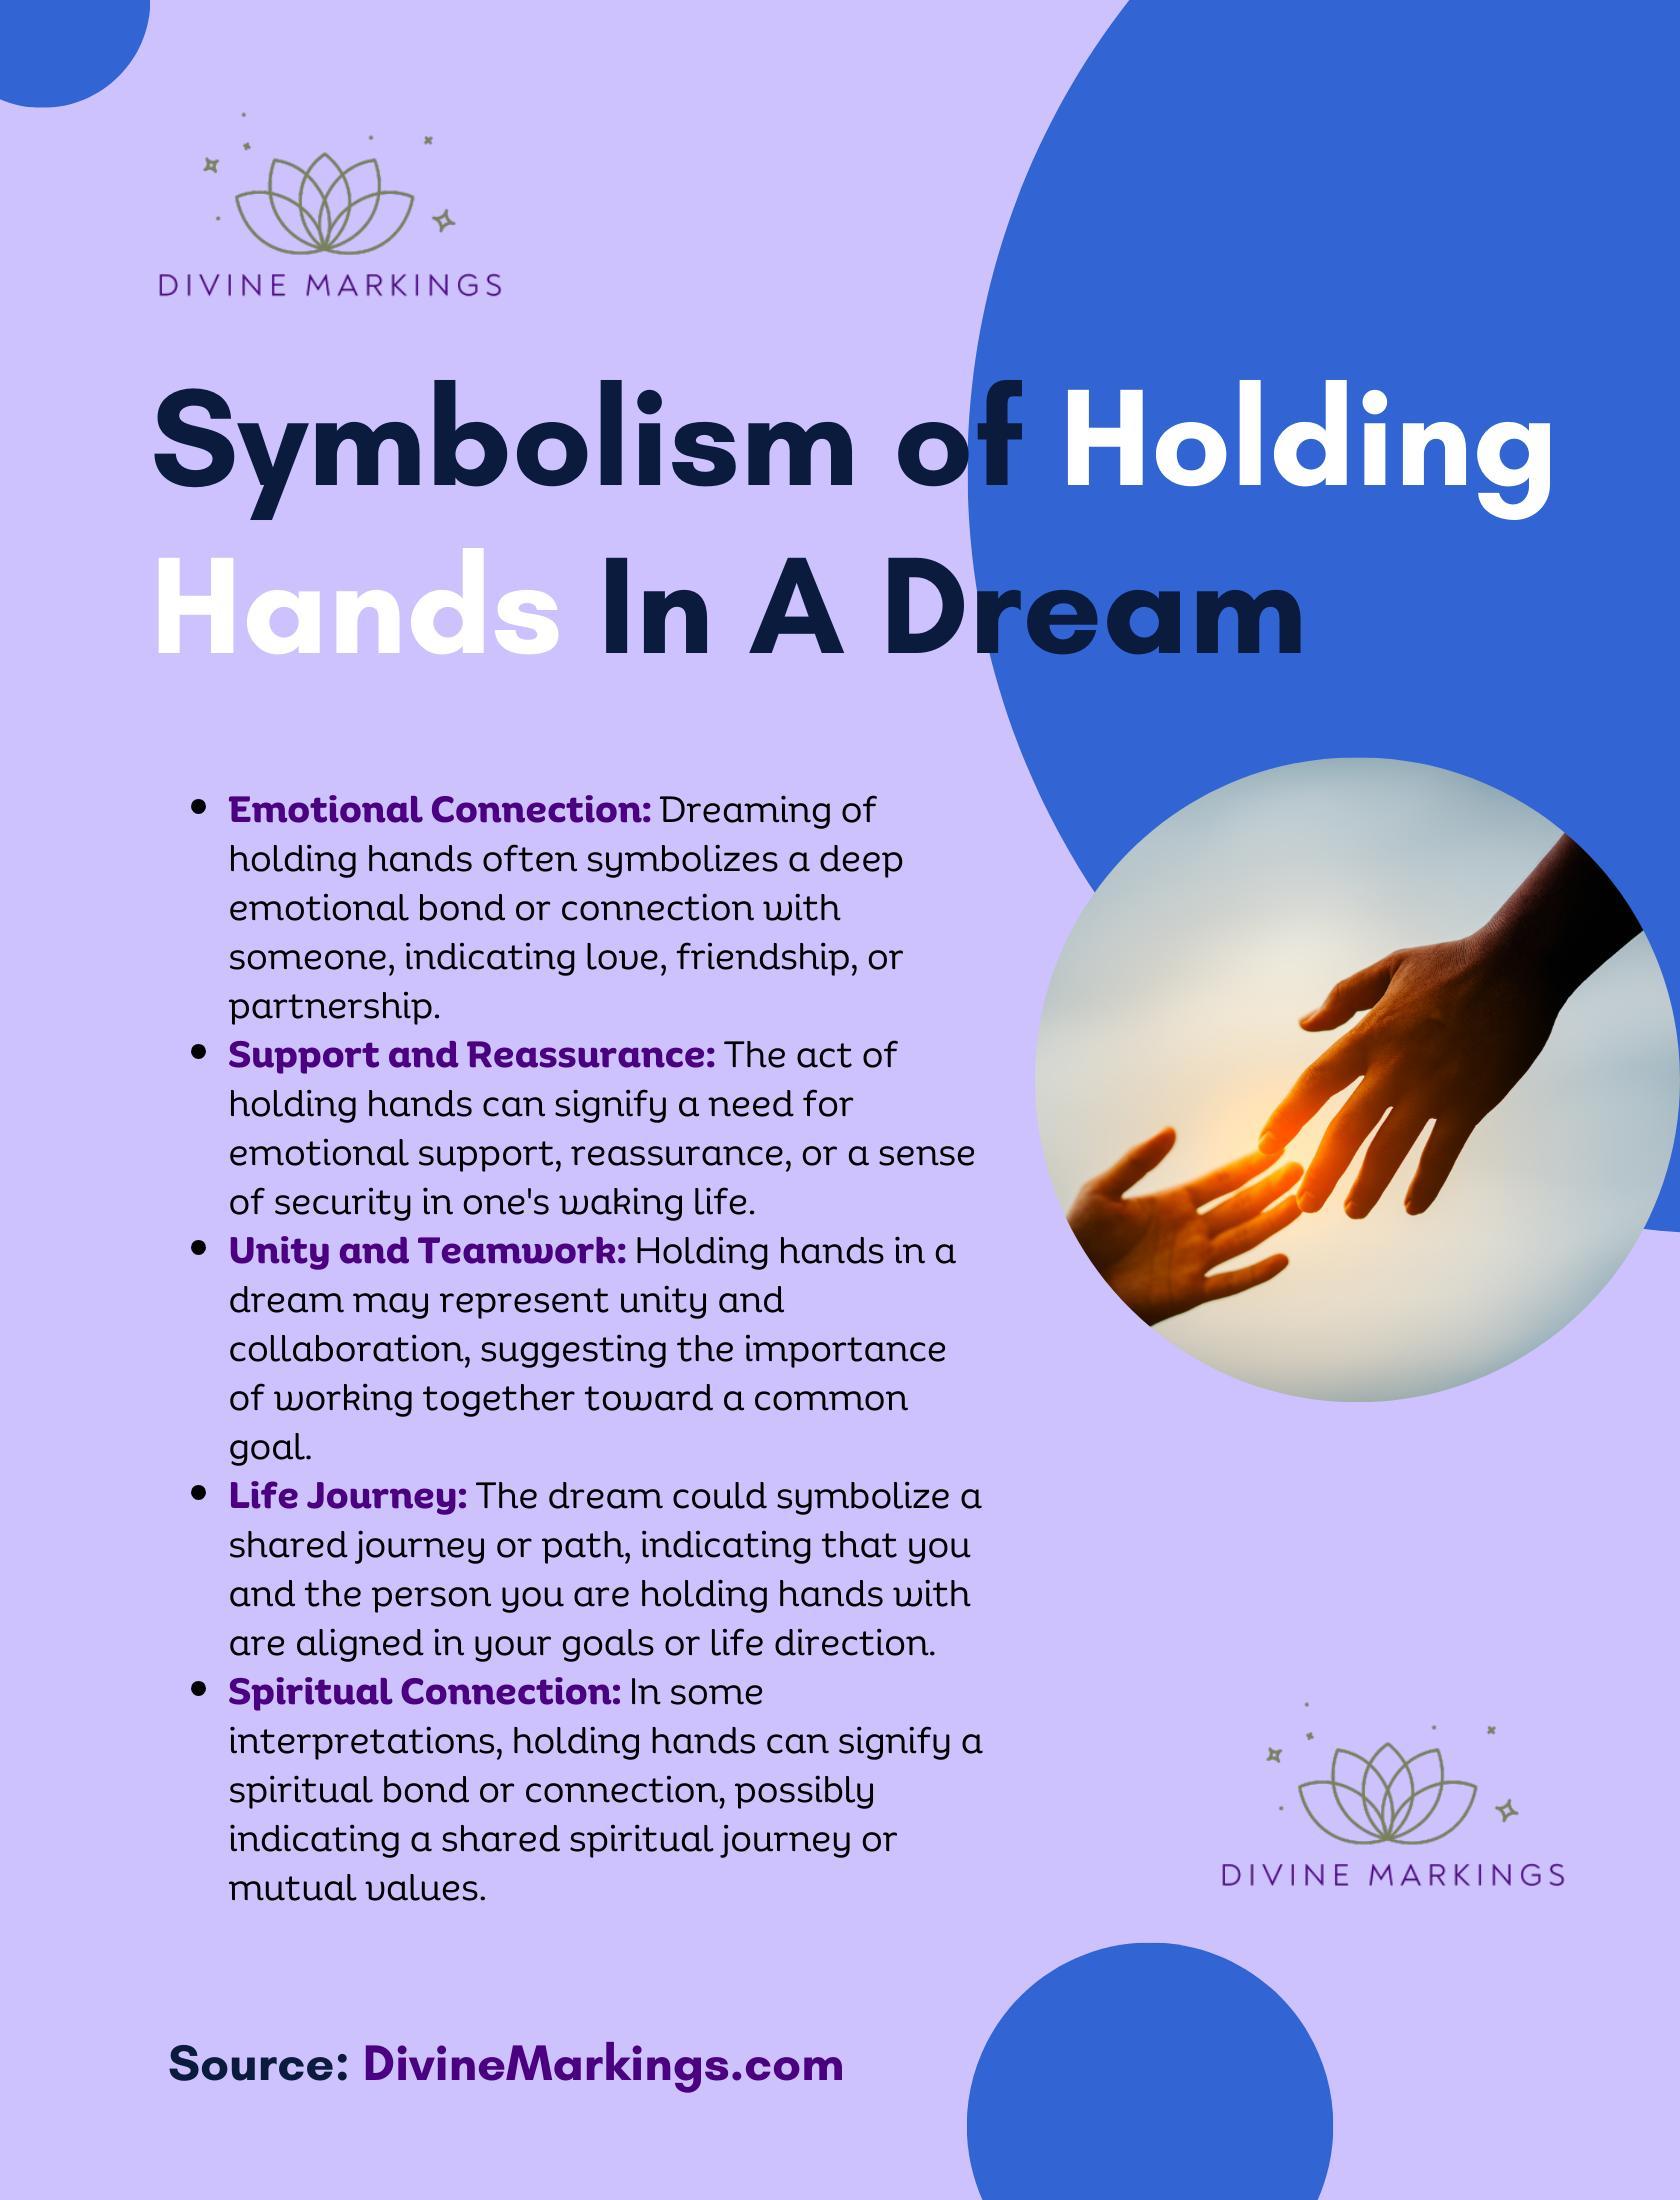 Symbolism of Holding Hands  In A Dream Infographic